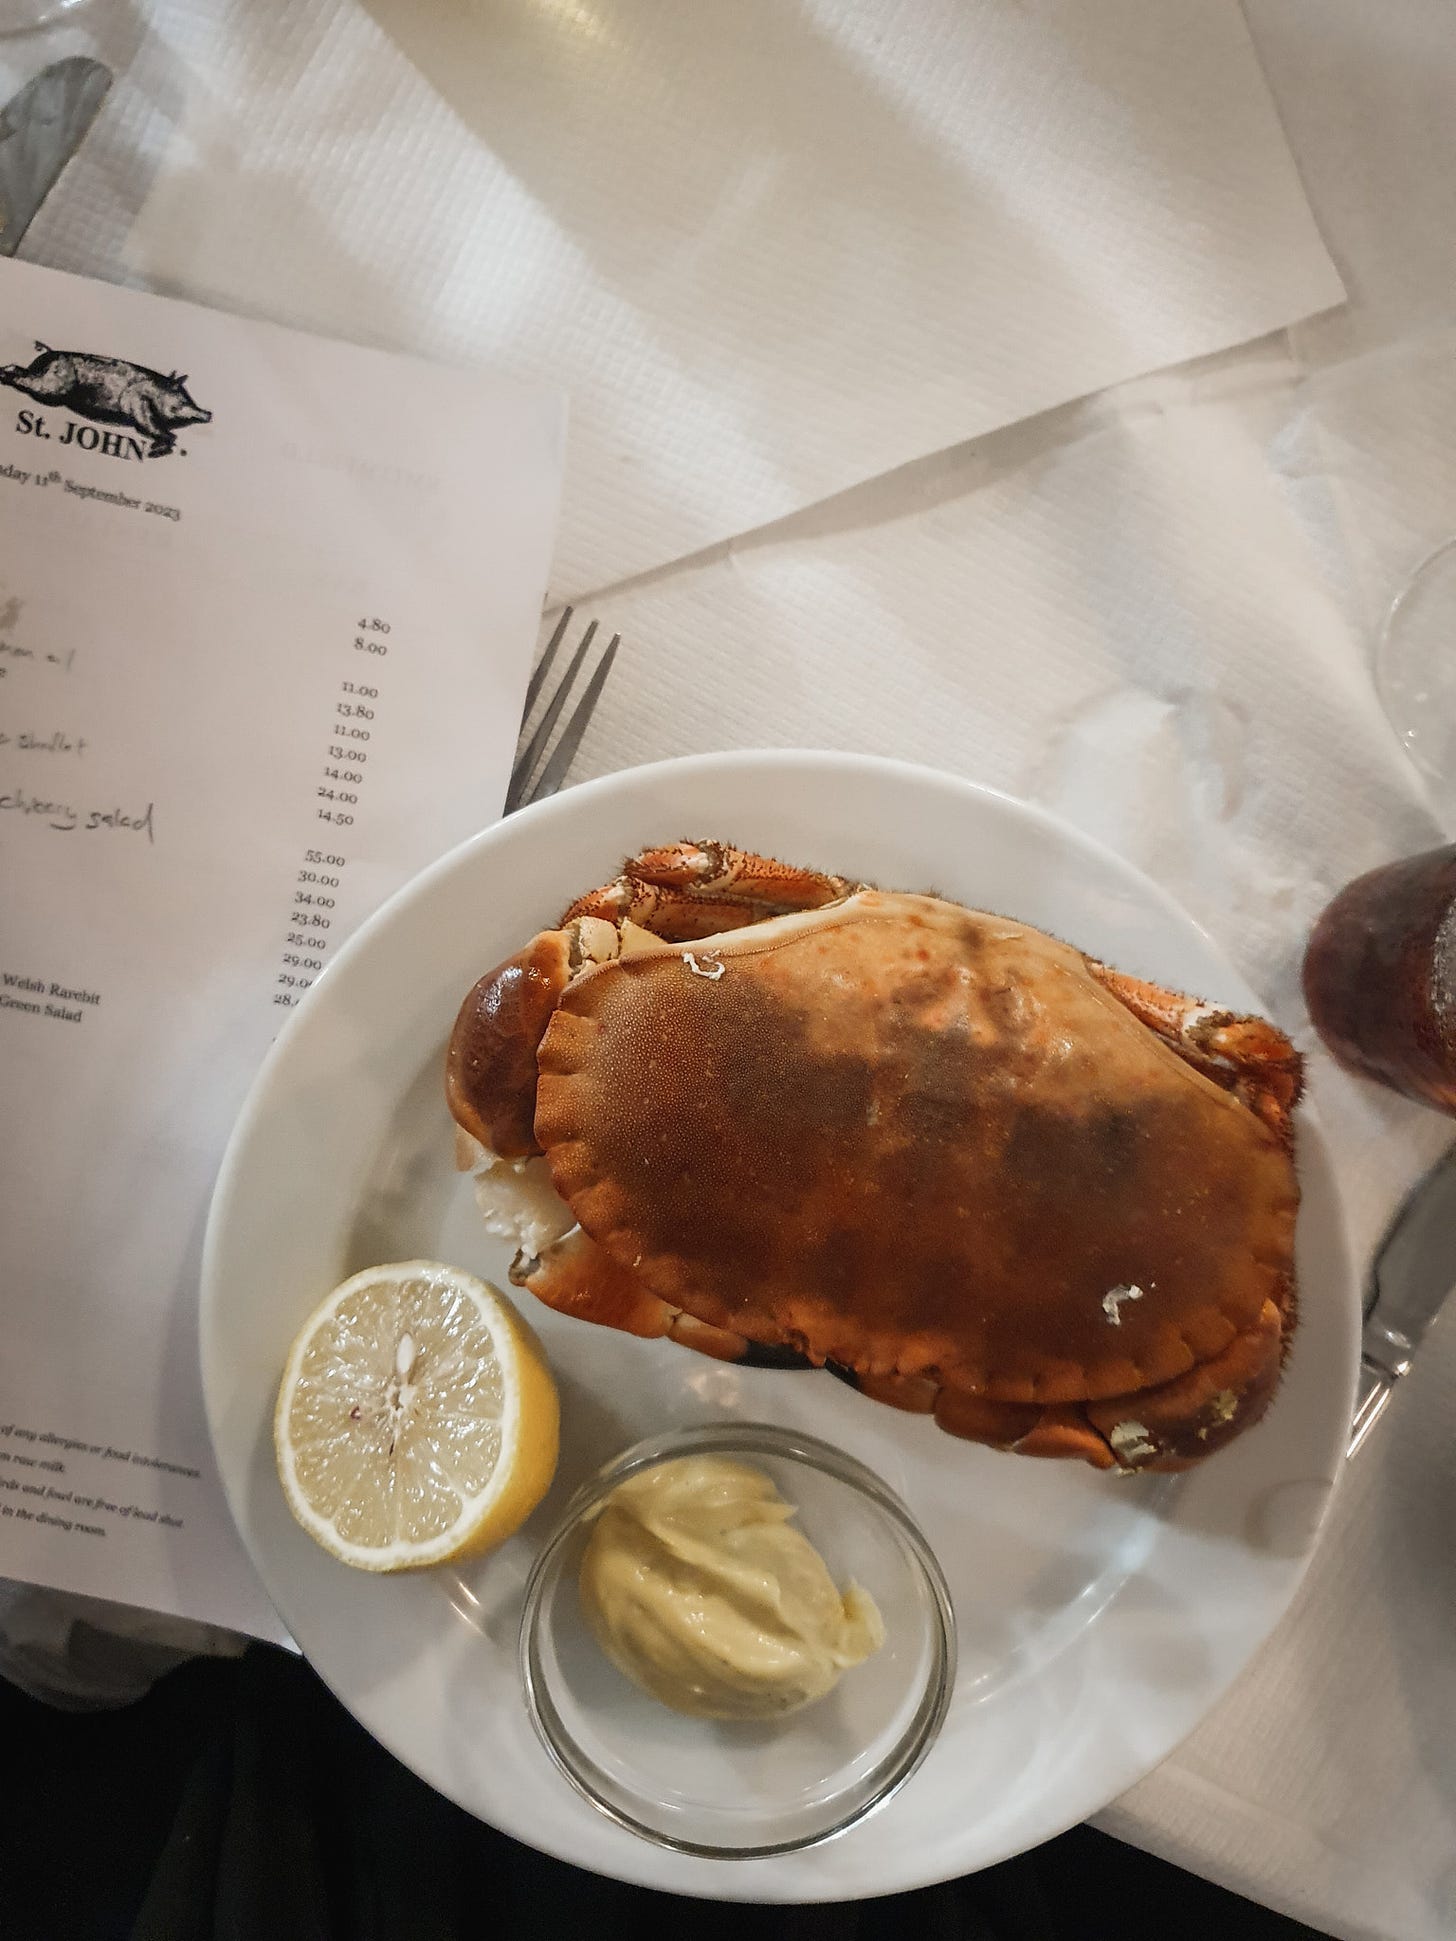 Photo of a whole crab on a plate on a table with white tablecloths